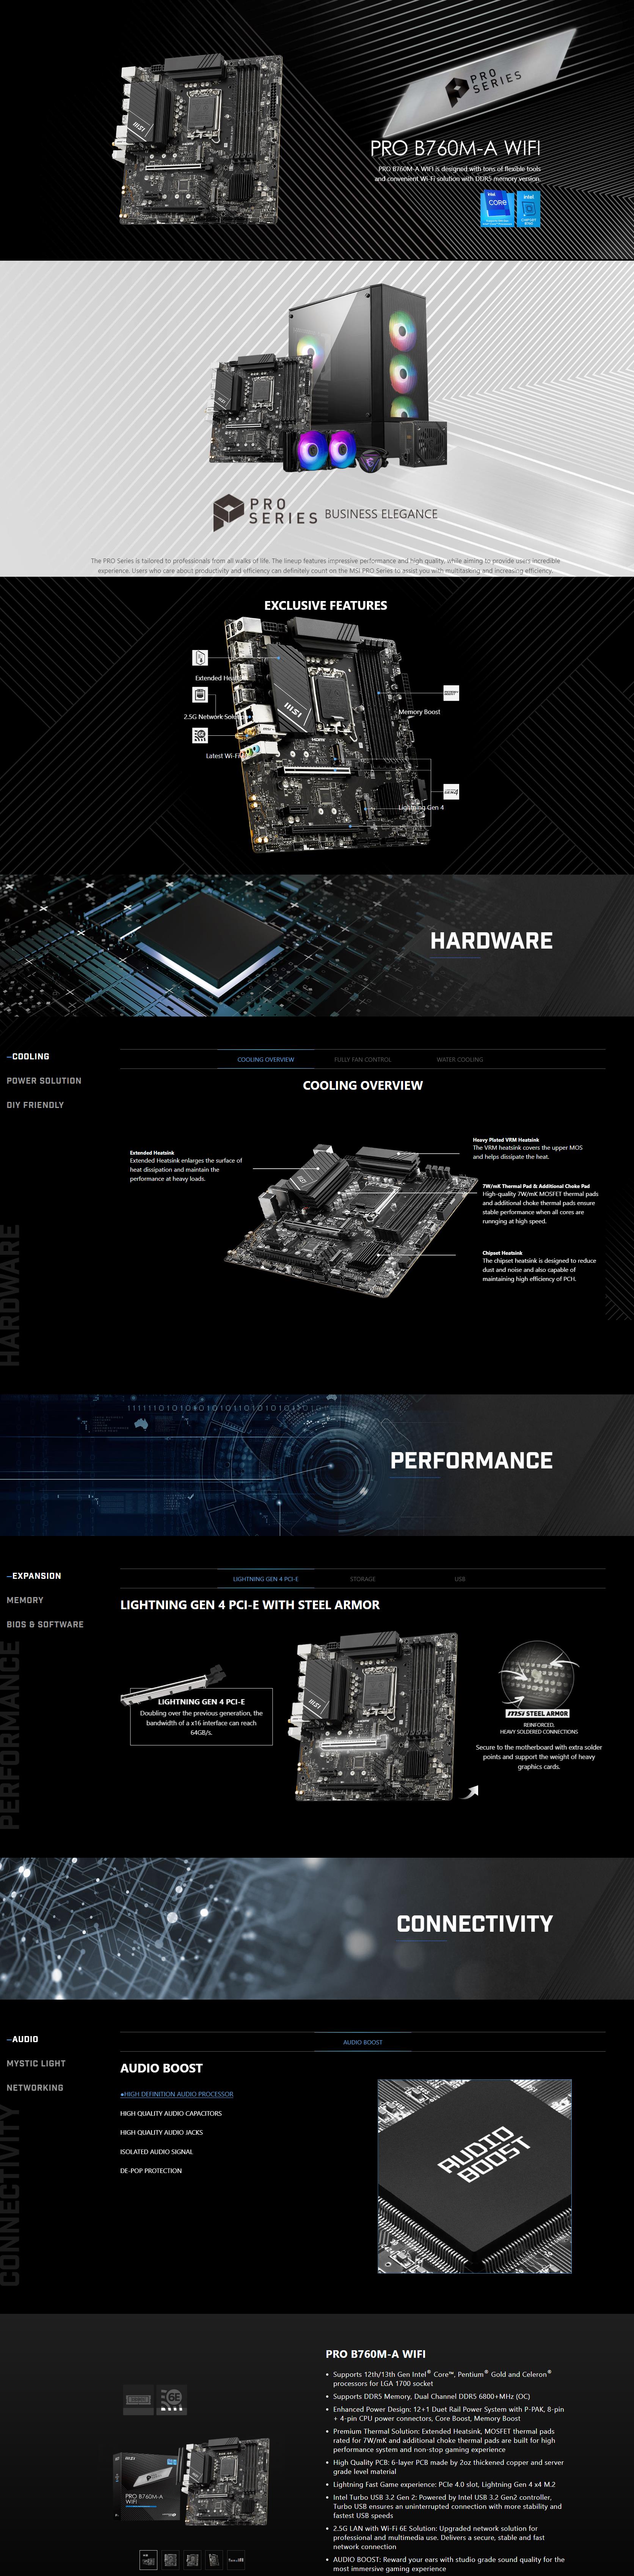 A large marketing image providing additional information about the product MSI PRO B760M-A WiFi LGA1700 mATX Desktop Motherboard - Additional alt info not provided